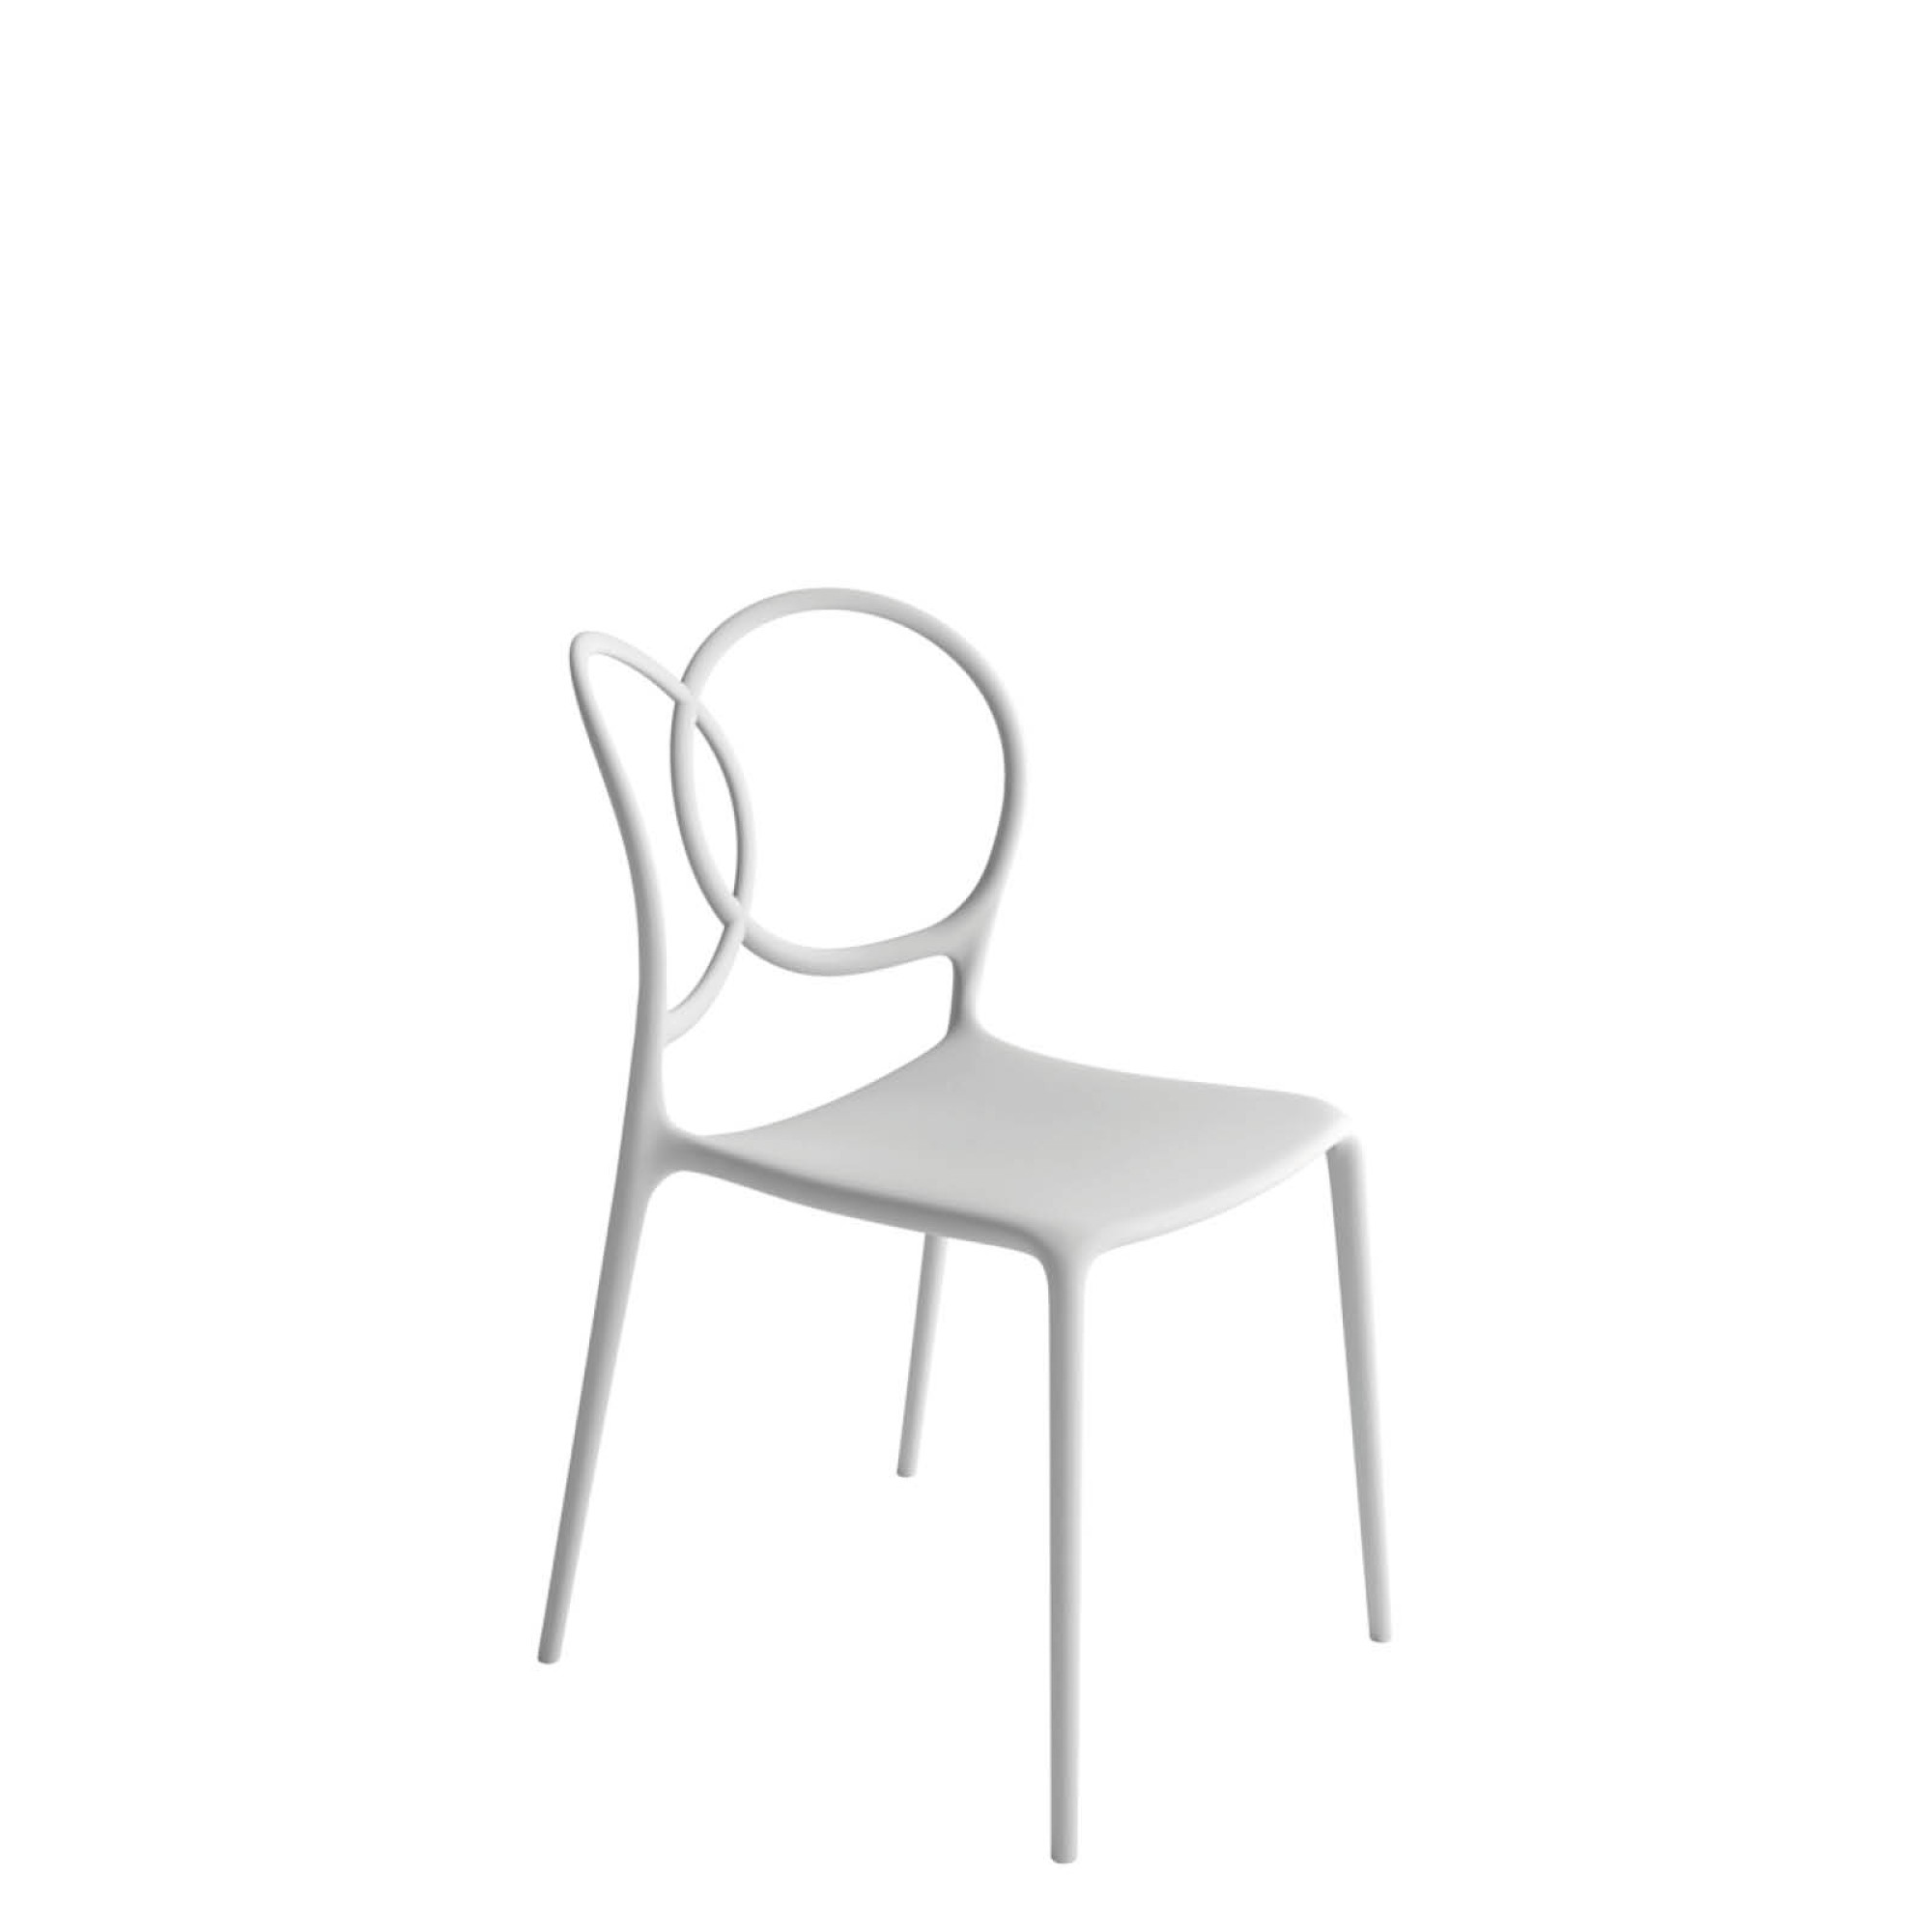 SISSI CHAIR, by DRIADE